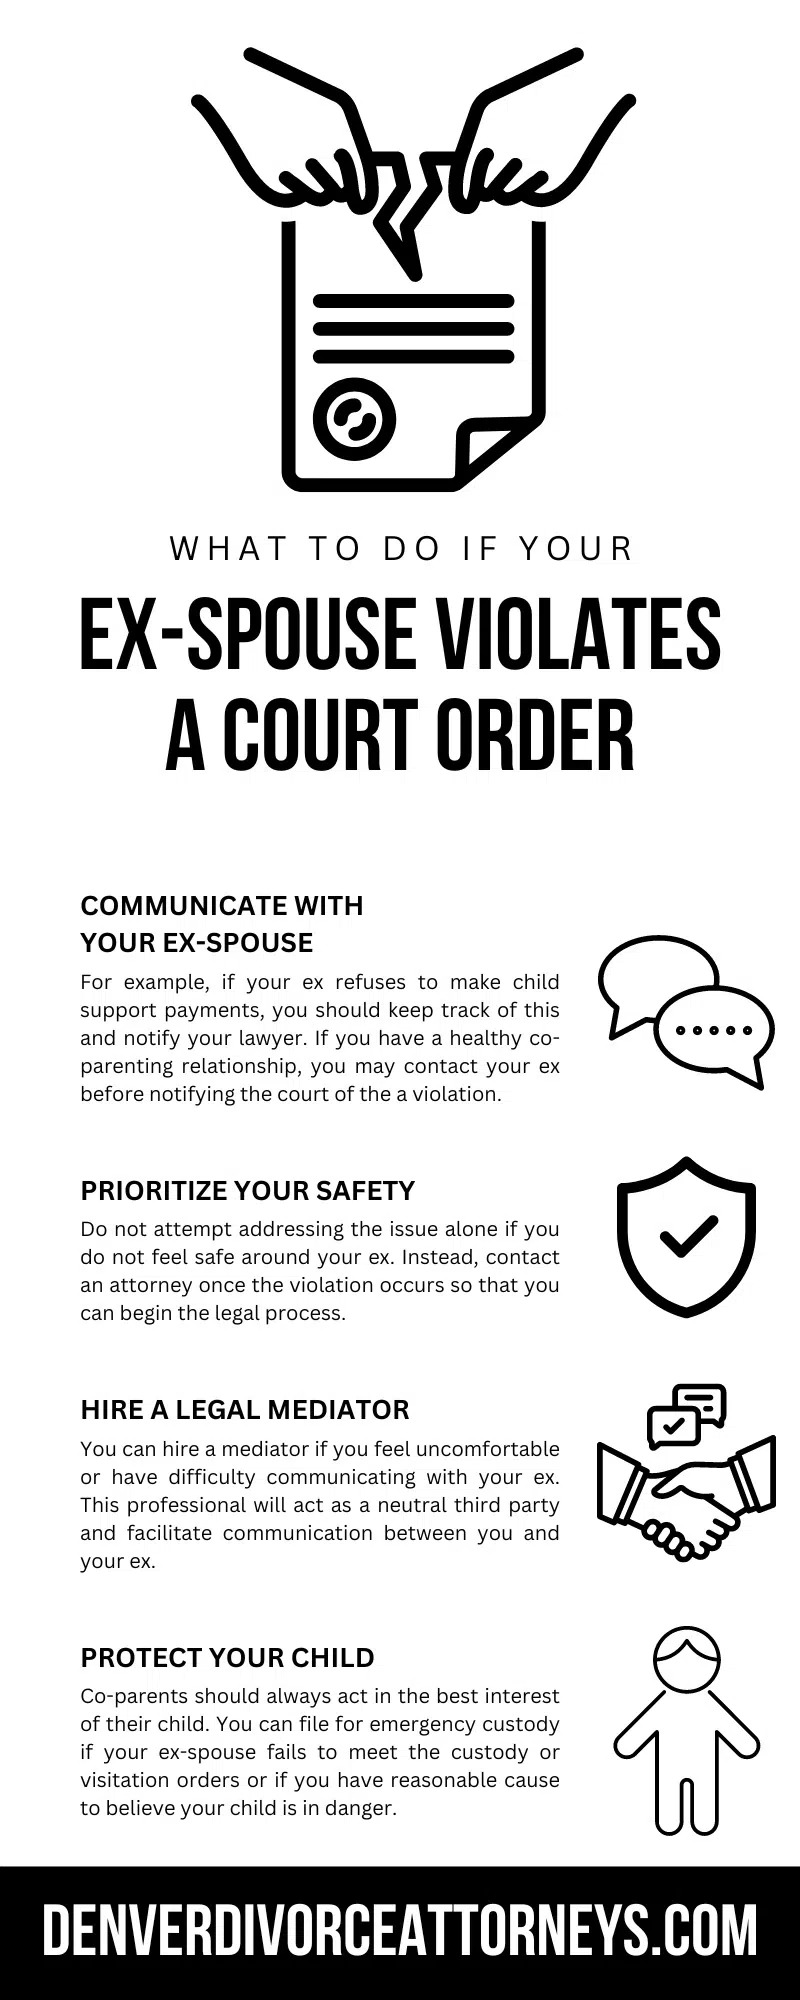 What To Do if Your Ex-Spouse Violates a Court Order